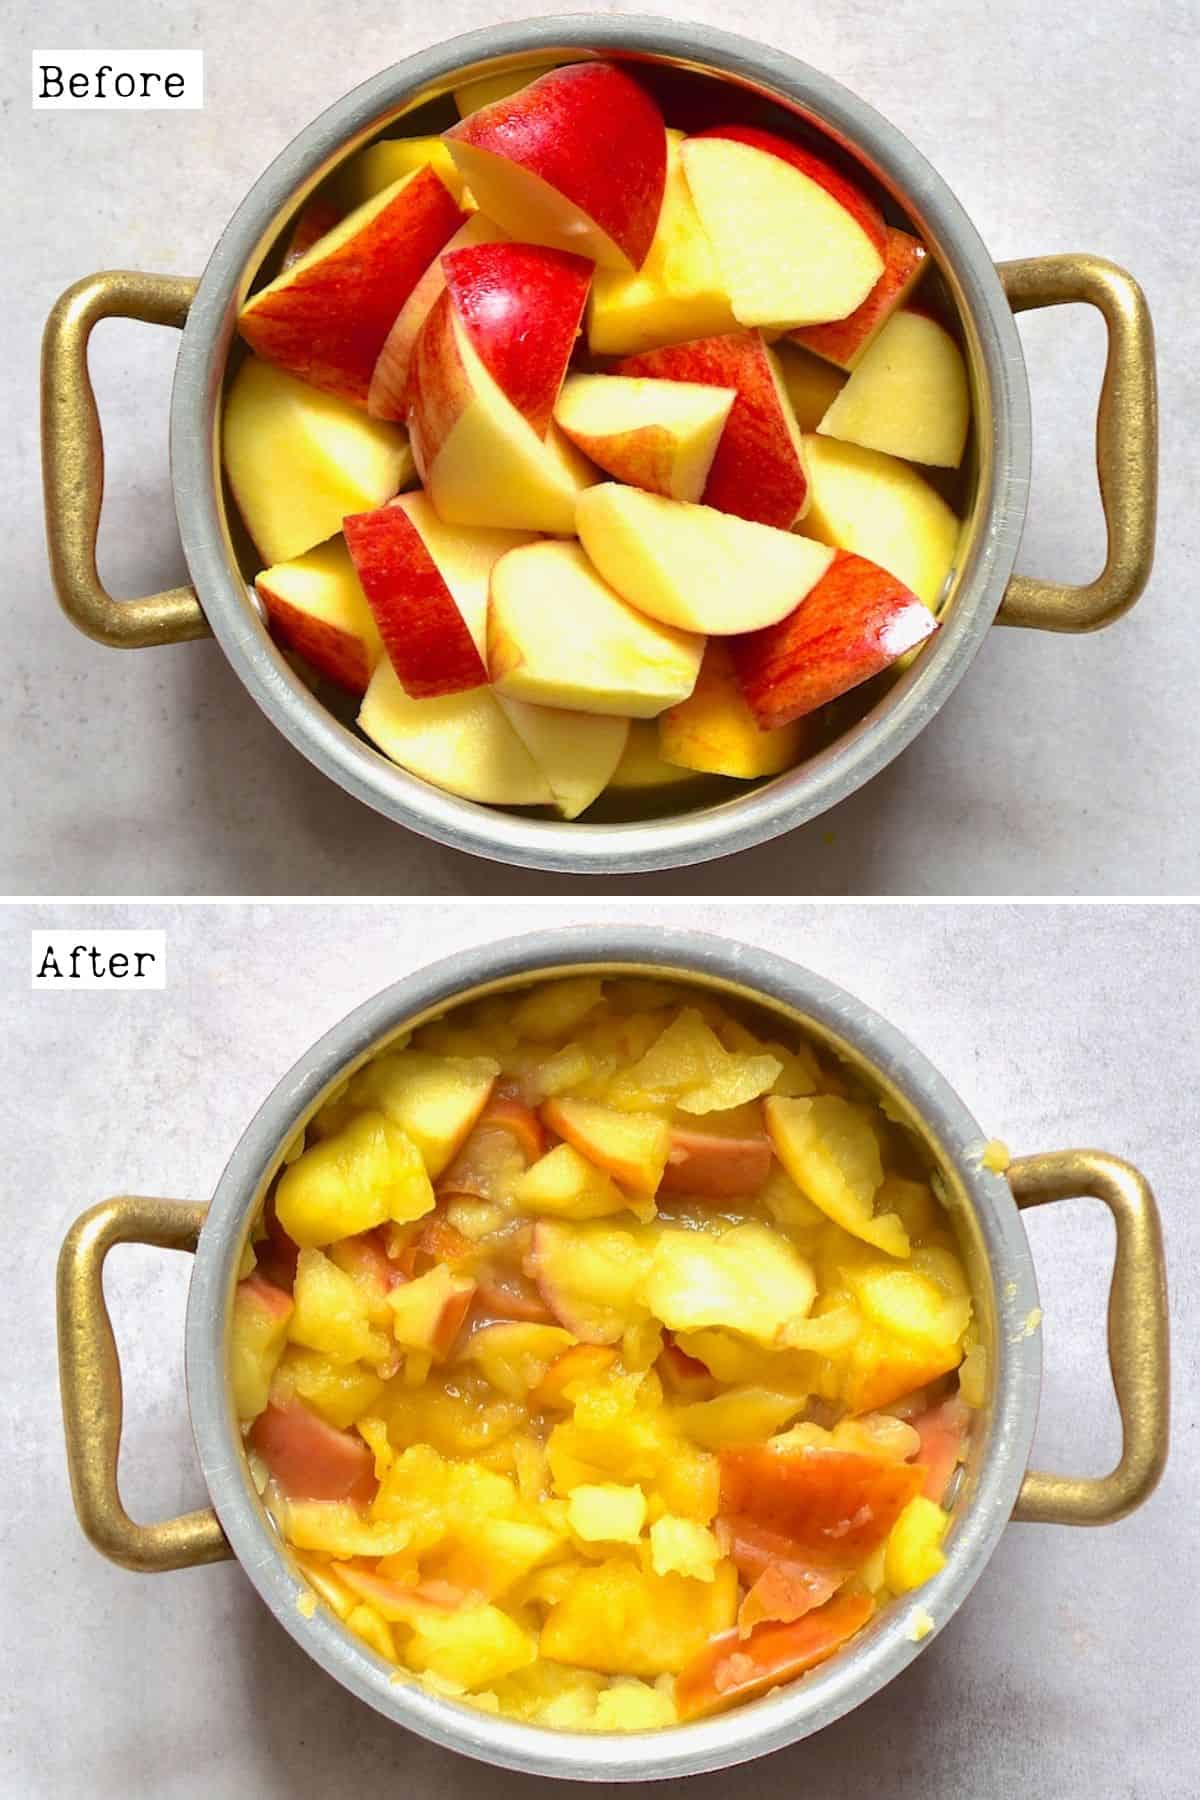 Before and after cooking apples